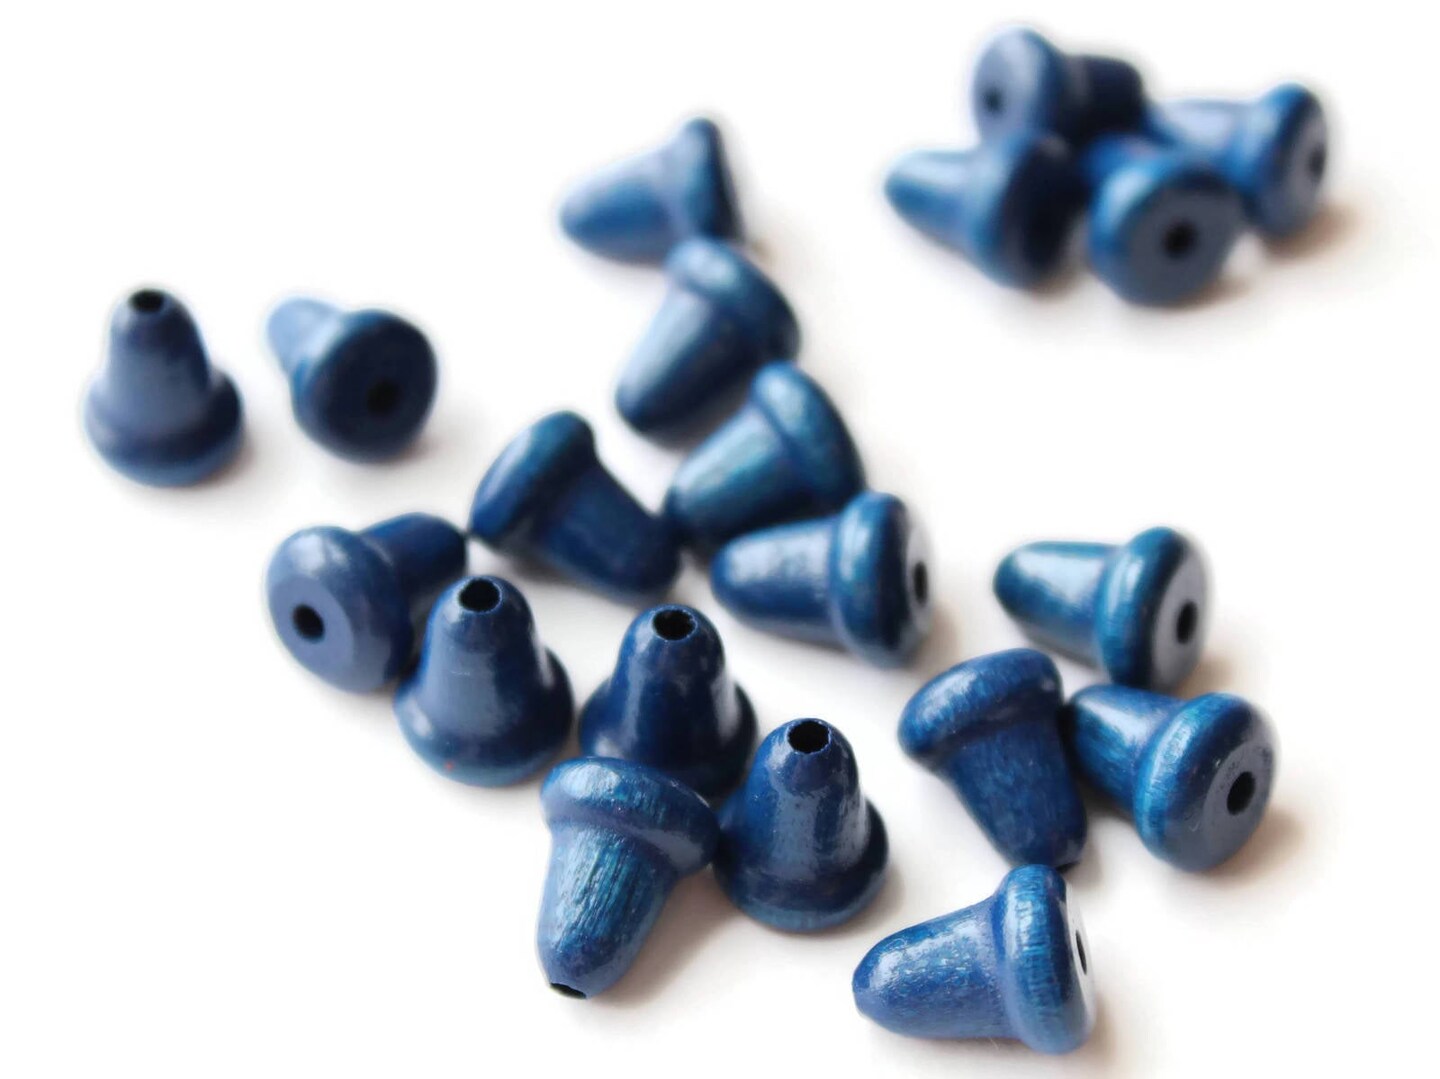 20 11mm Blue Wooden Bell Beads Vintage Wood End Beads Loose Bell Shaped Beads